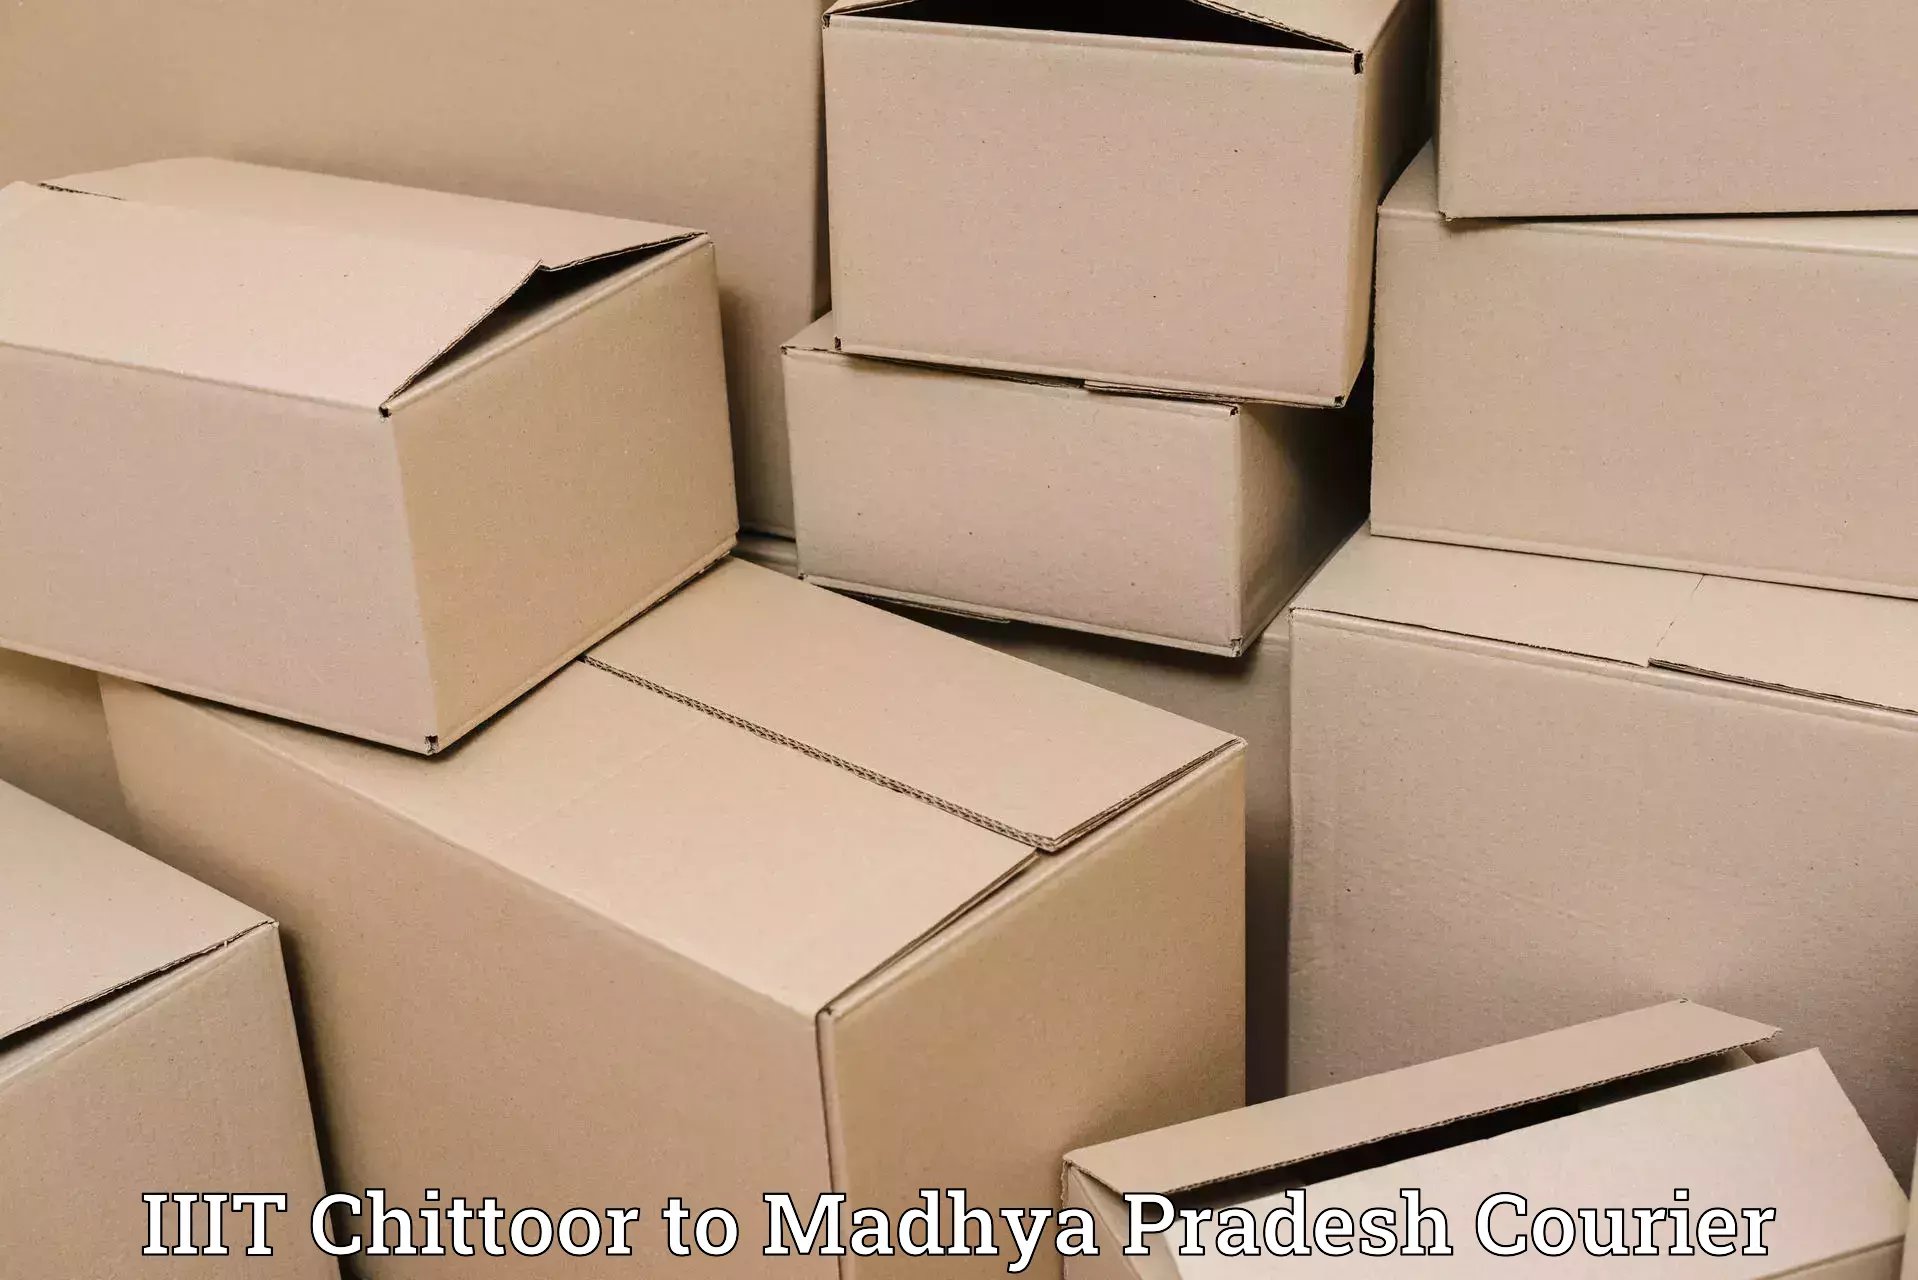 Automated parcel services IIIT Chittoor to Madwas